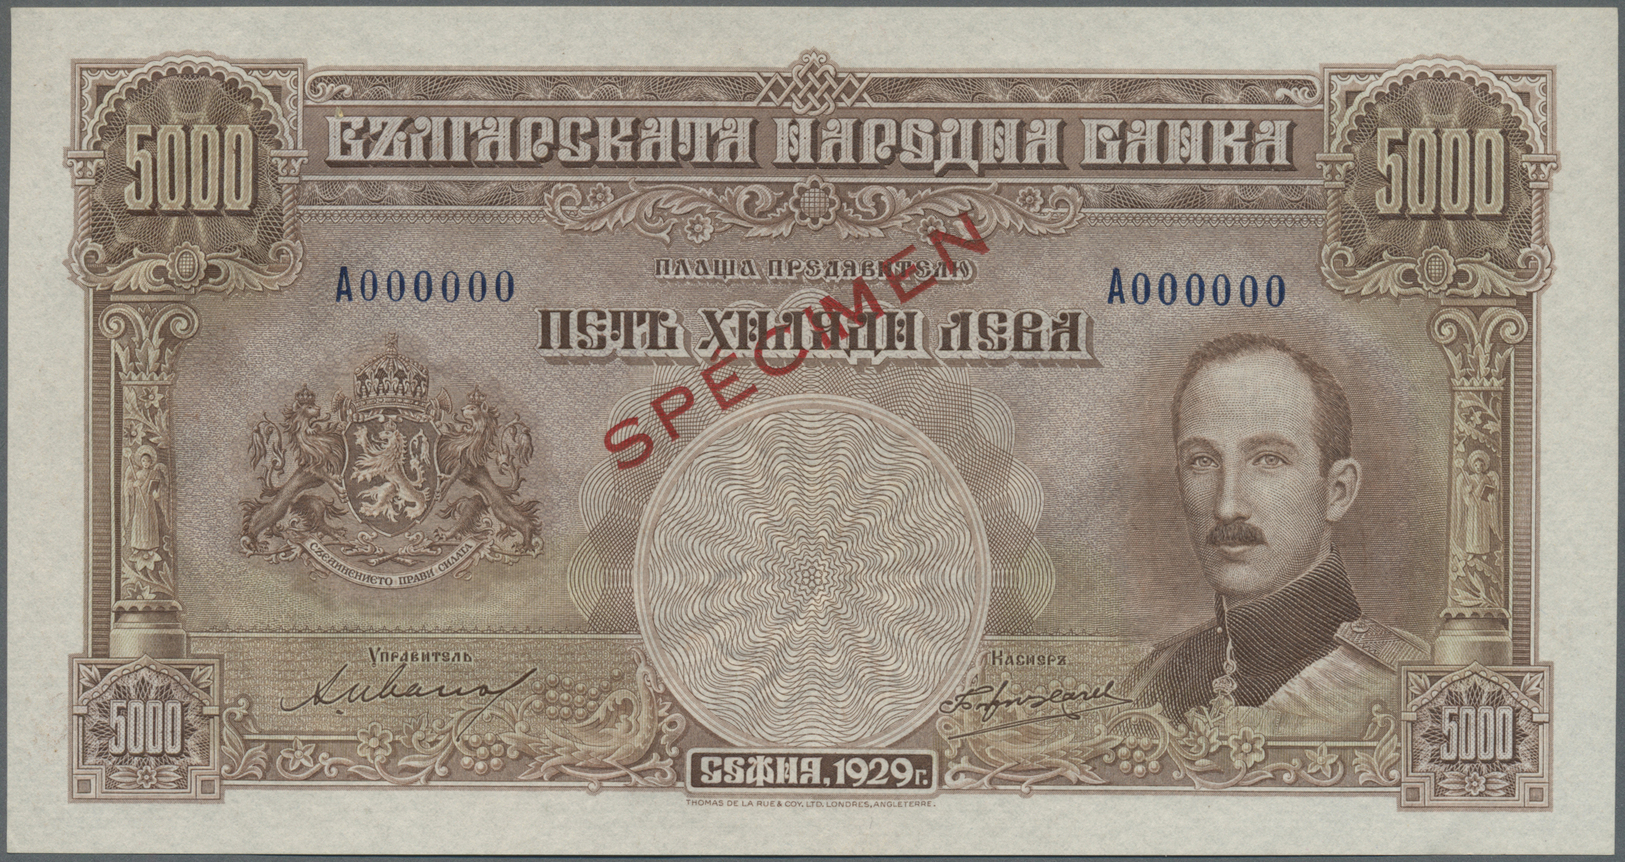 00408 Bulgaria / Bulgarien: 5000 Leva 1929 SPECIMEN, P.54s With Lightly Wavy Paper As Usually, Otherwise Perfect UNC Con - Bulgaria